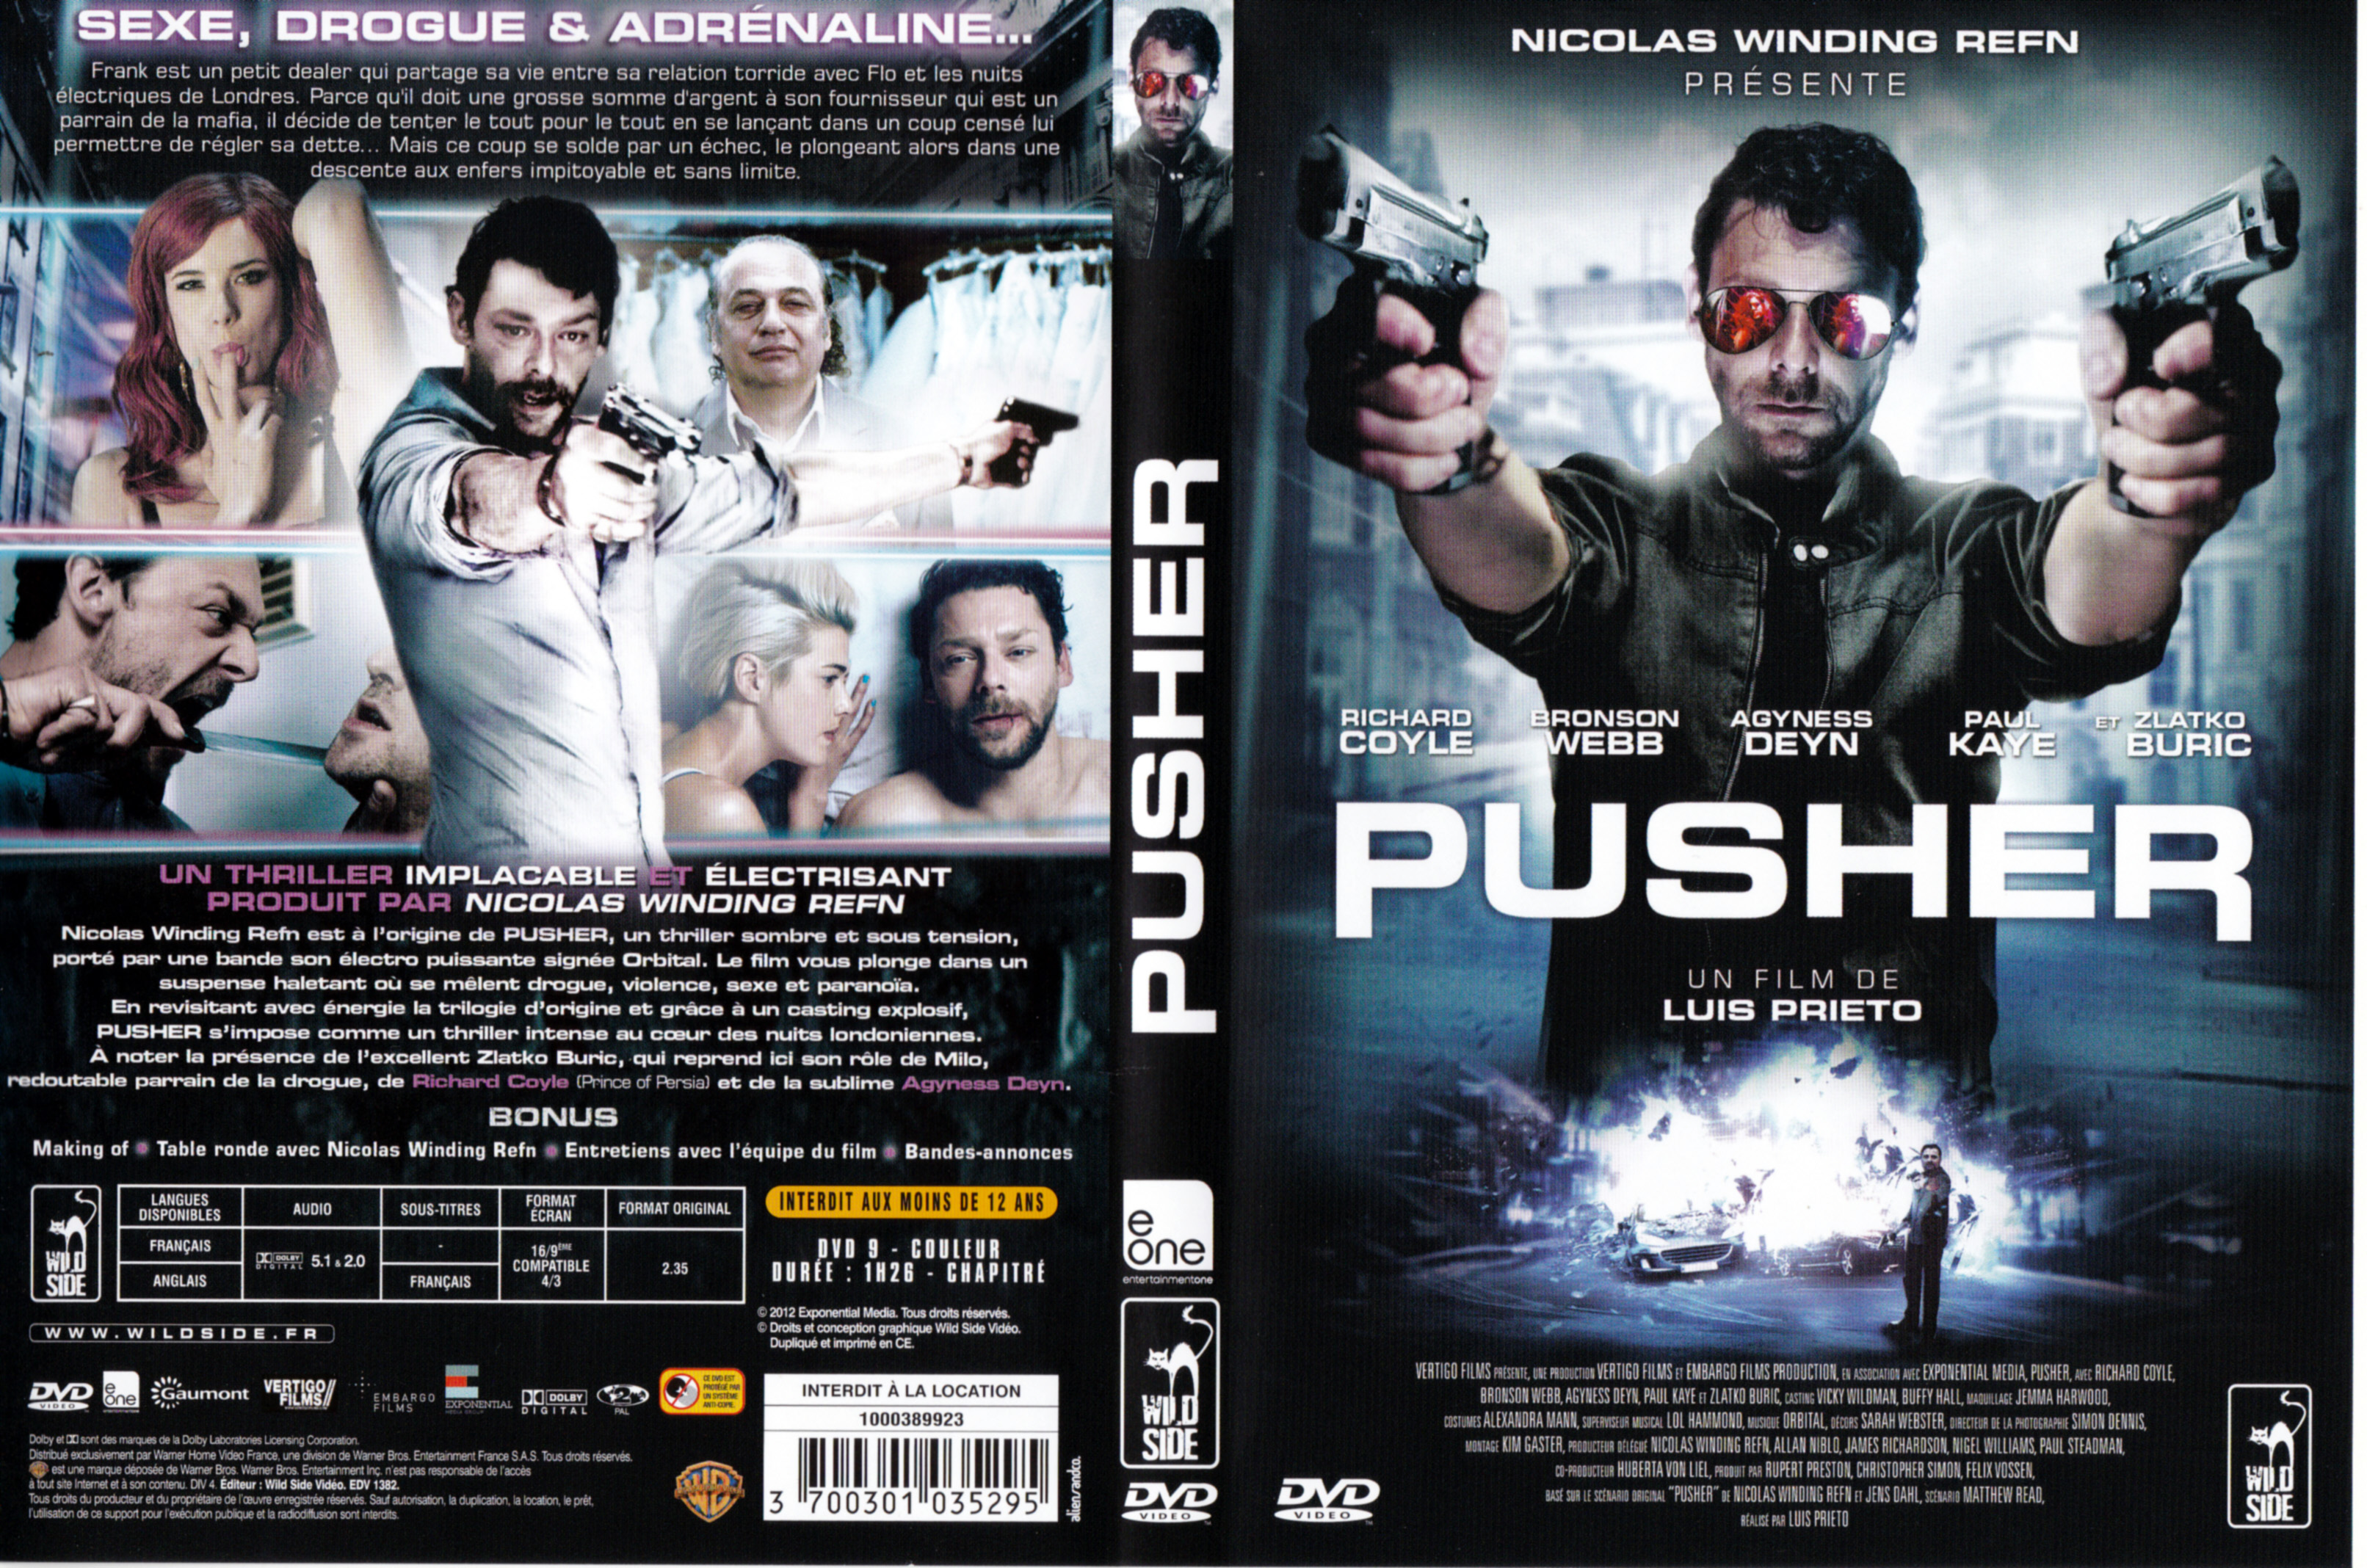 Jaquette DVD Pusher (2012)